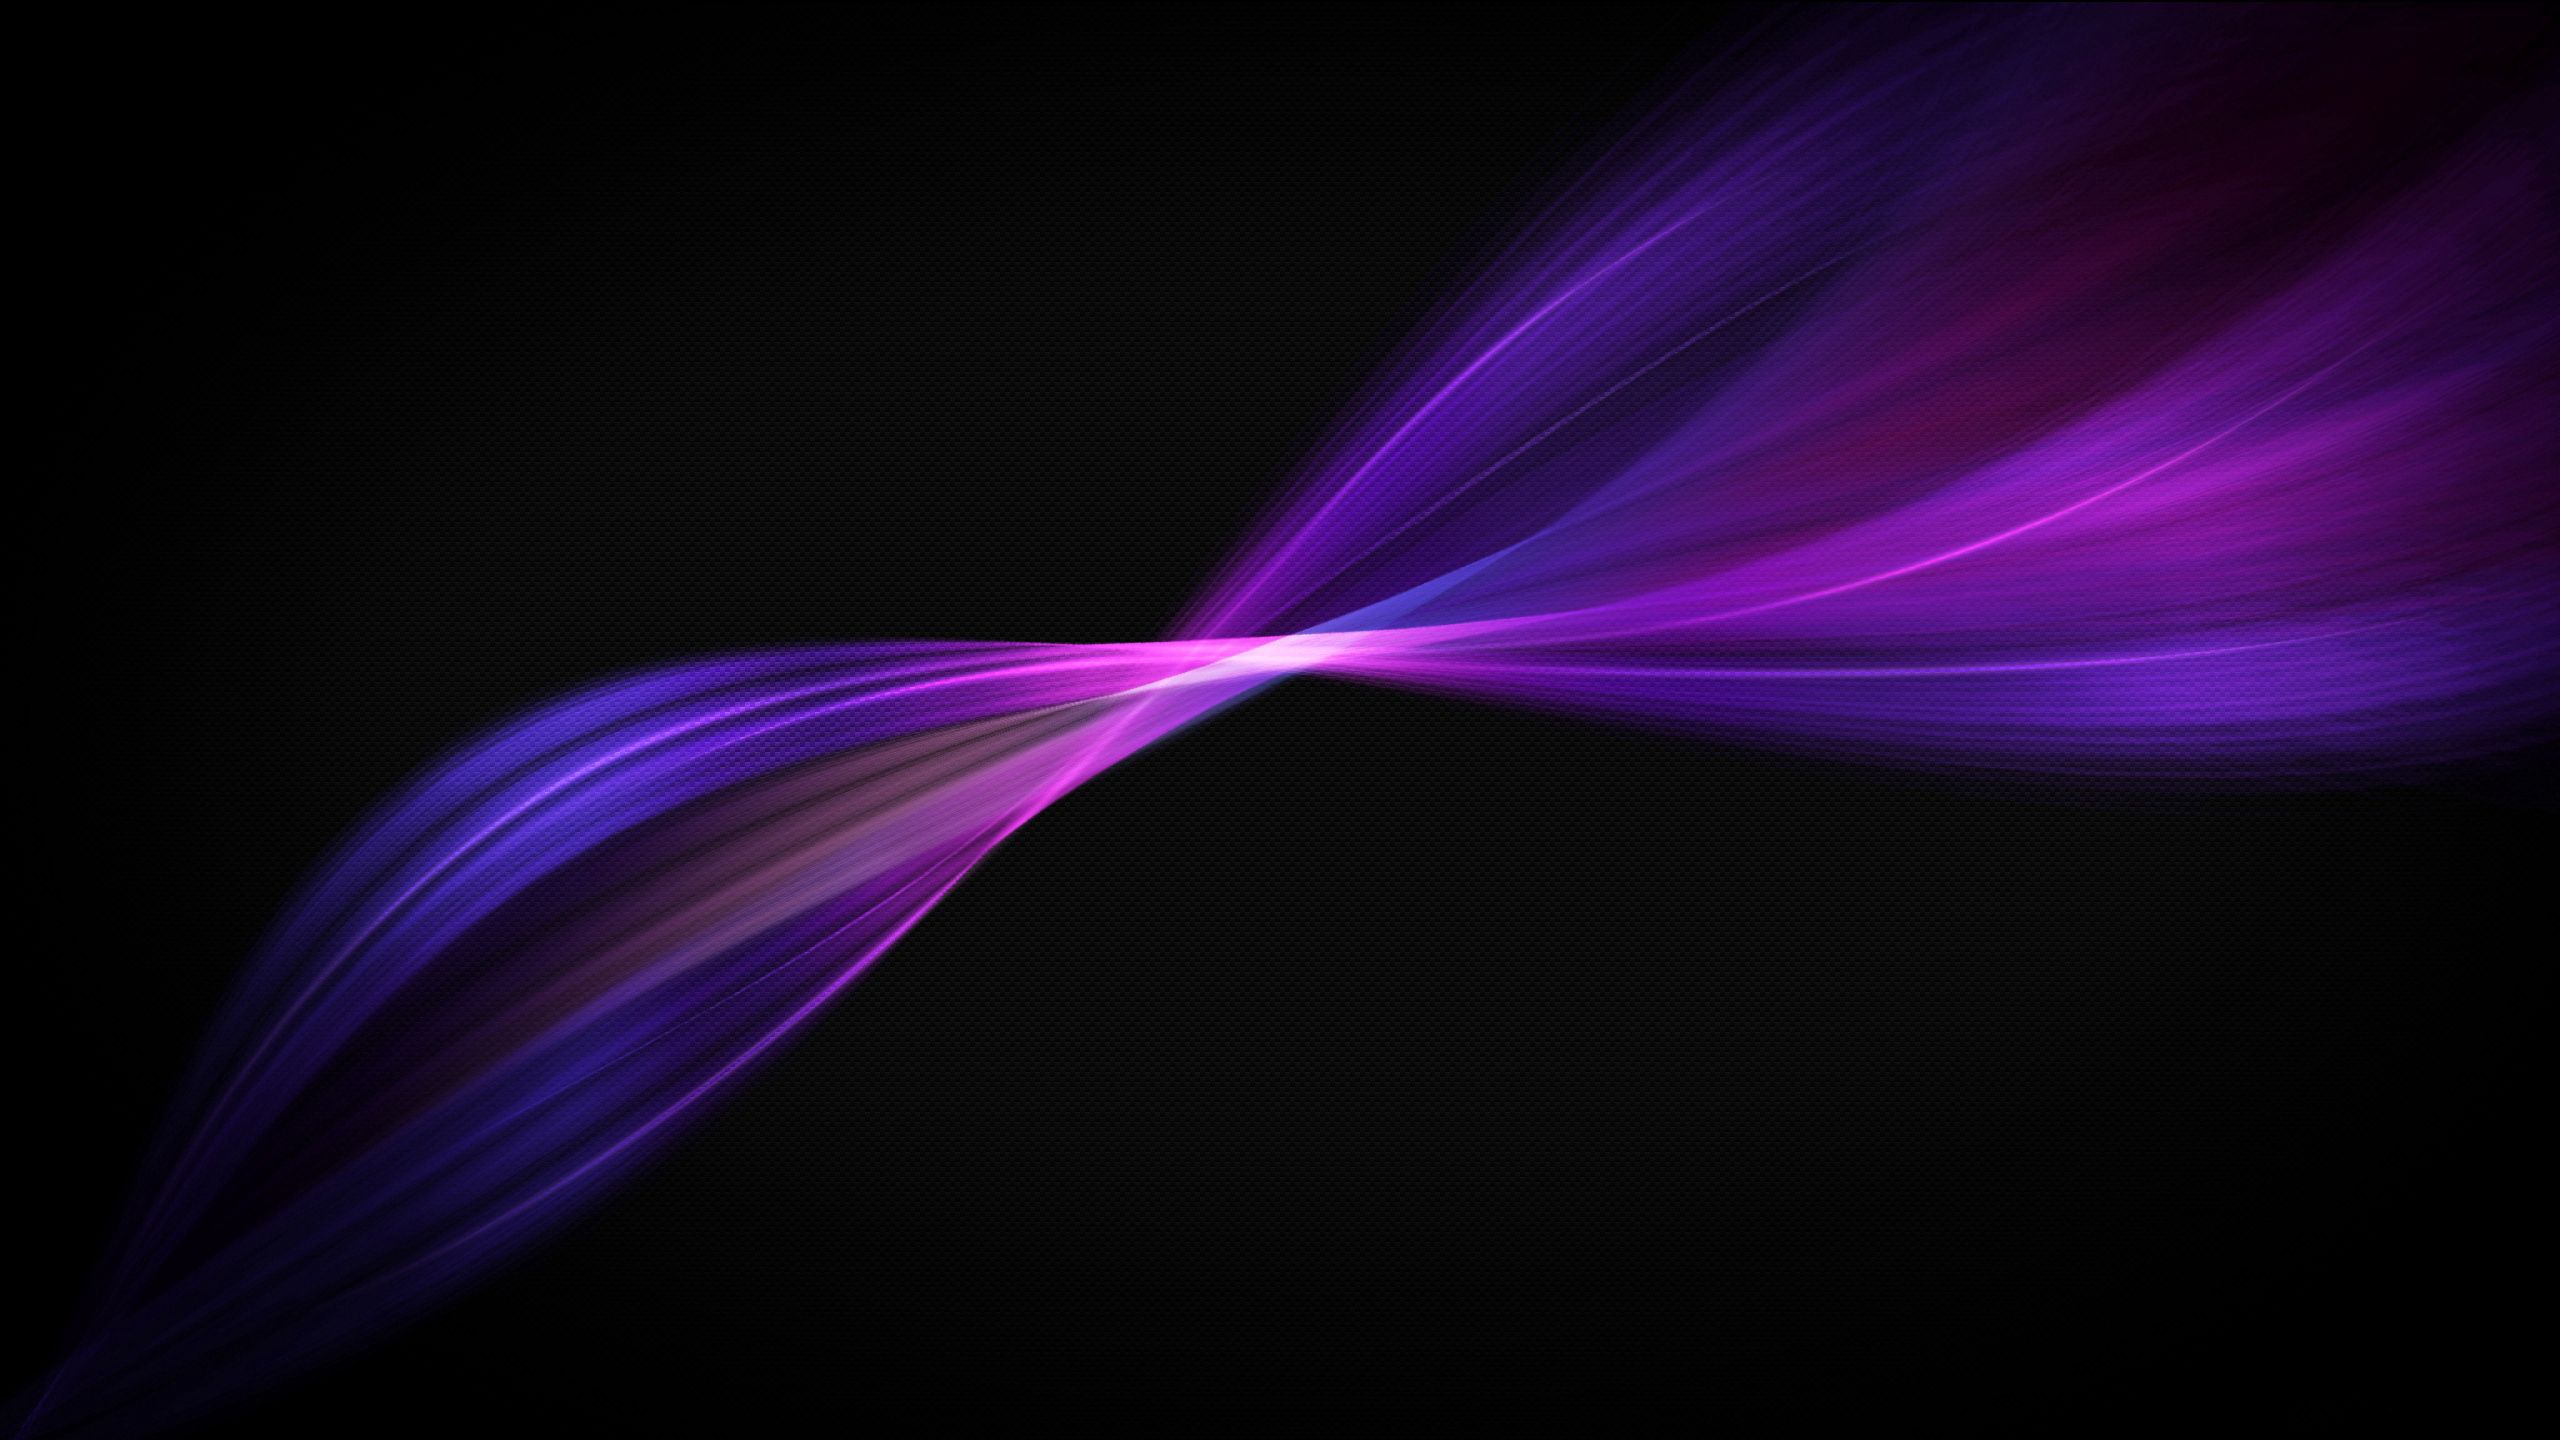 graphics, background, purple, black, abstract, violet, lines, color 4K Ultra